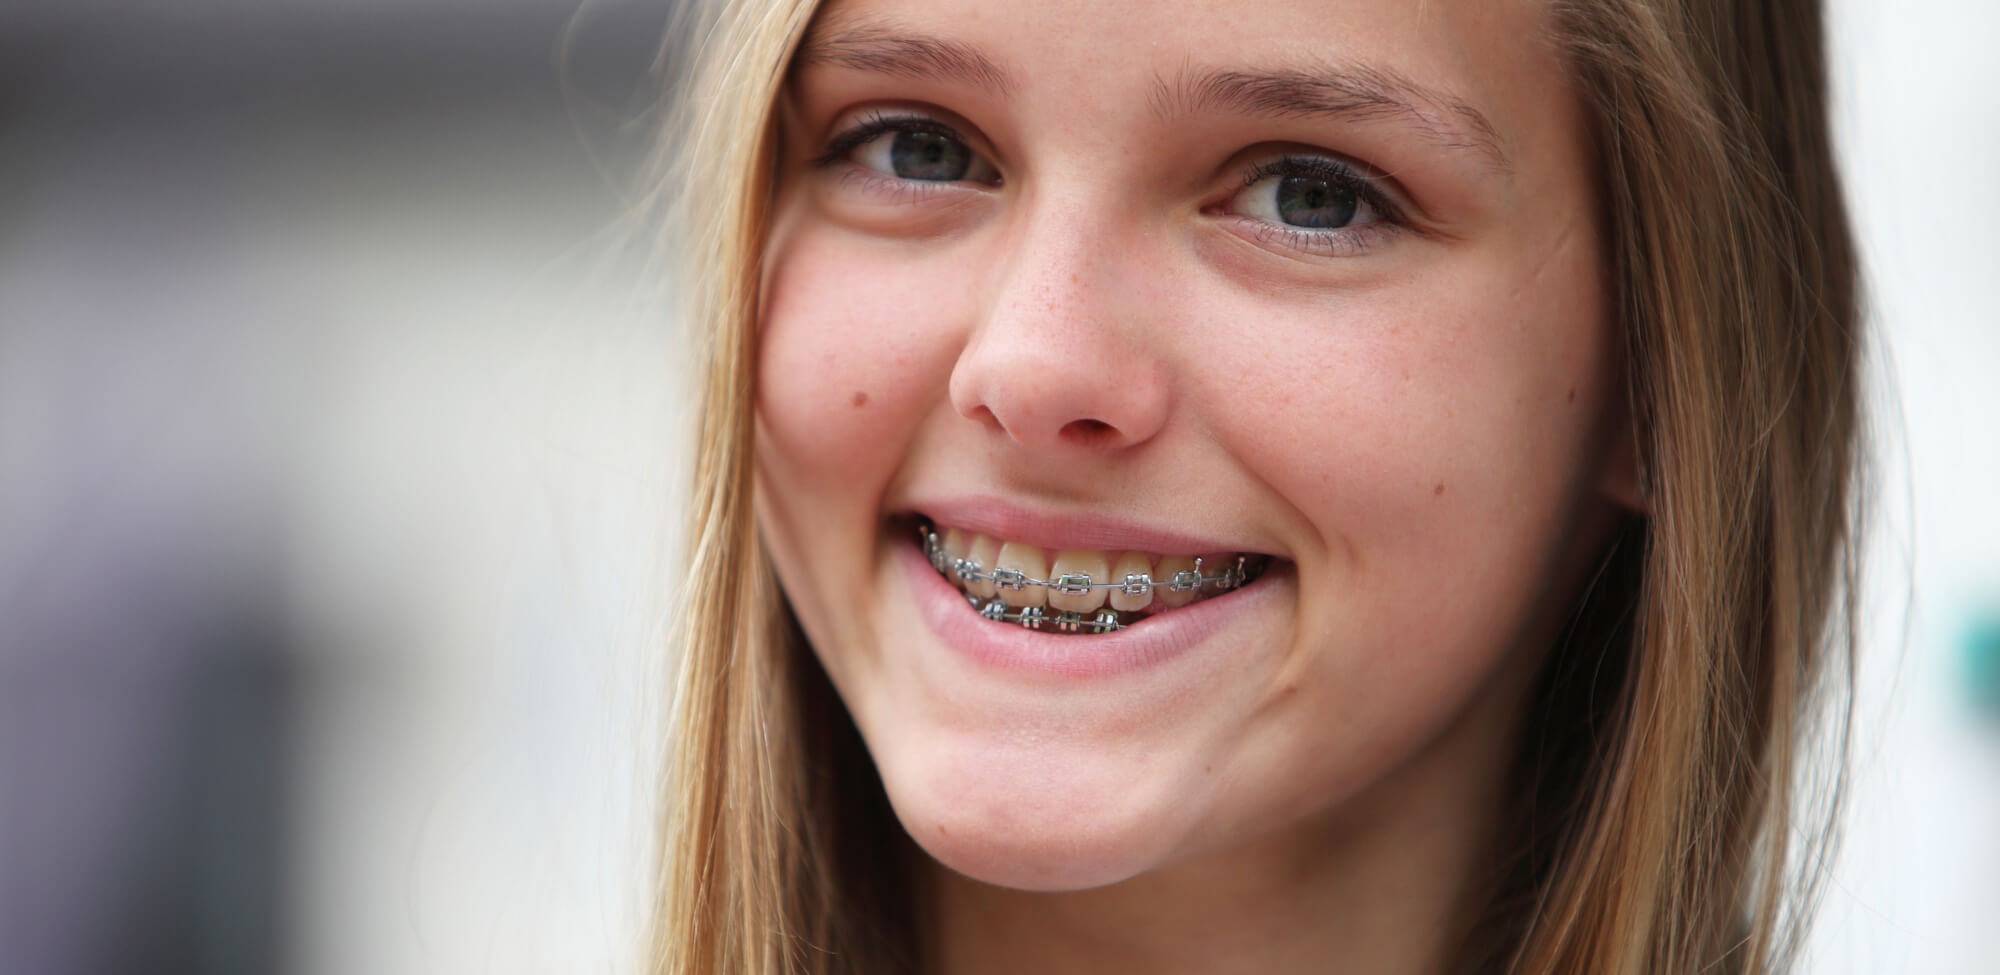 Can I get cavities filled with braces? How do I prevent them?